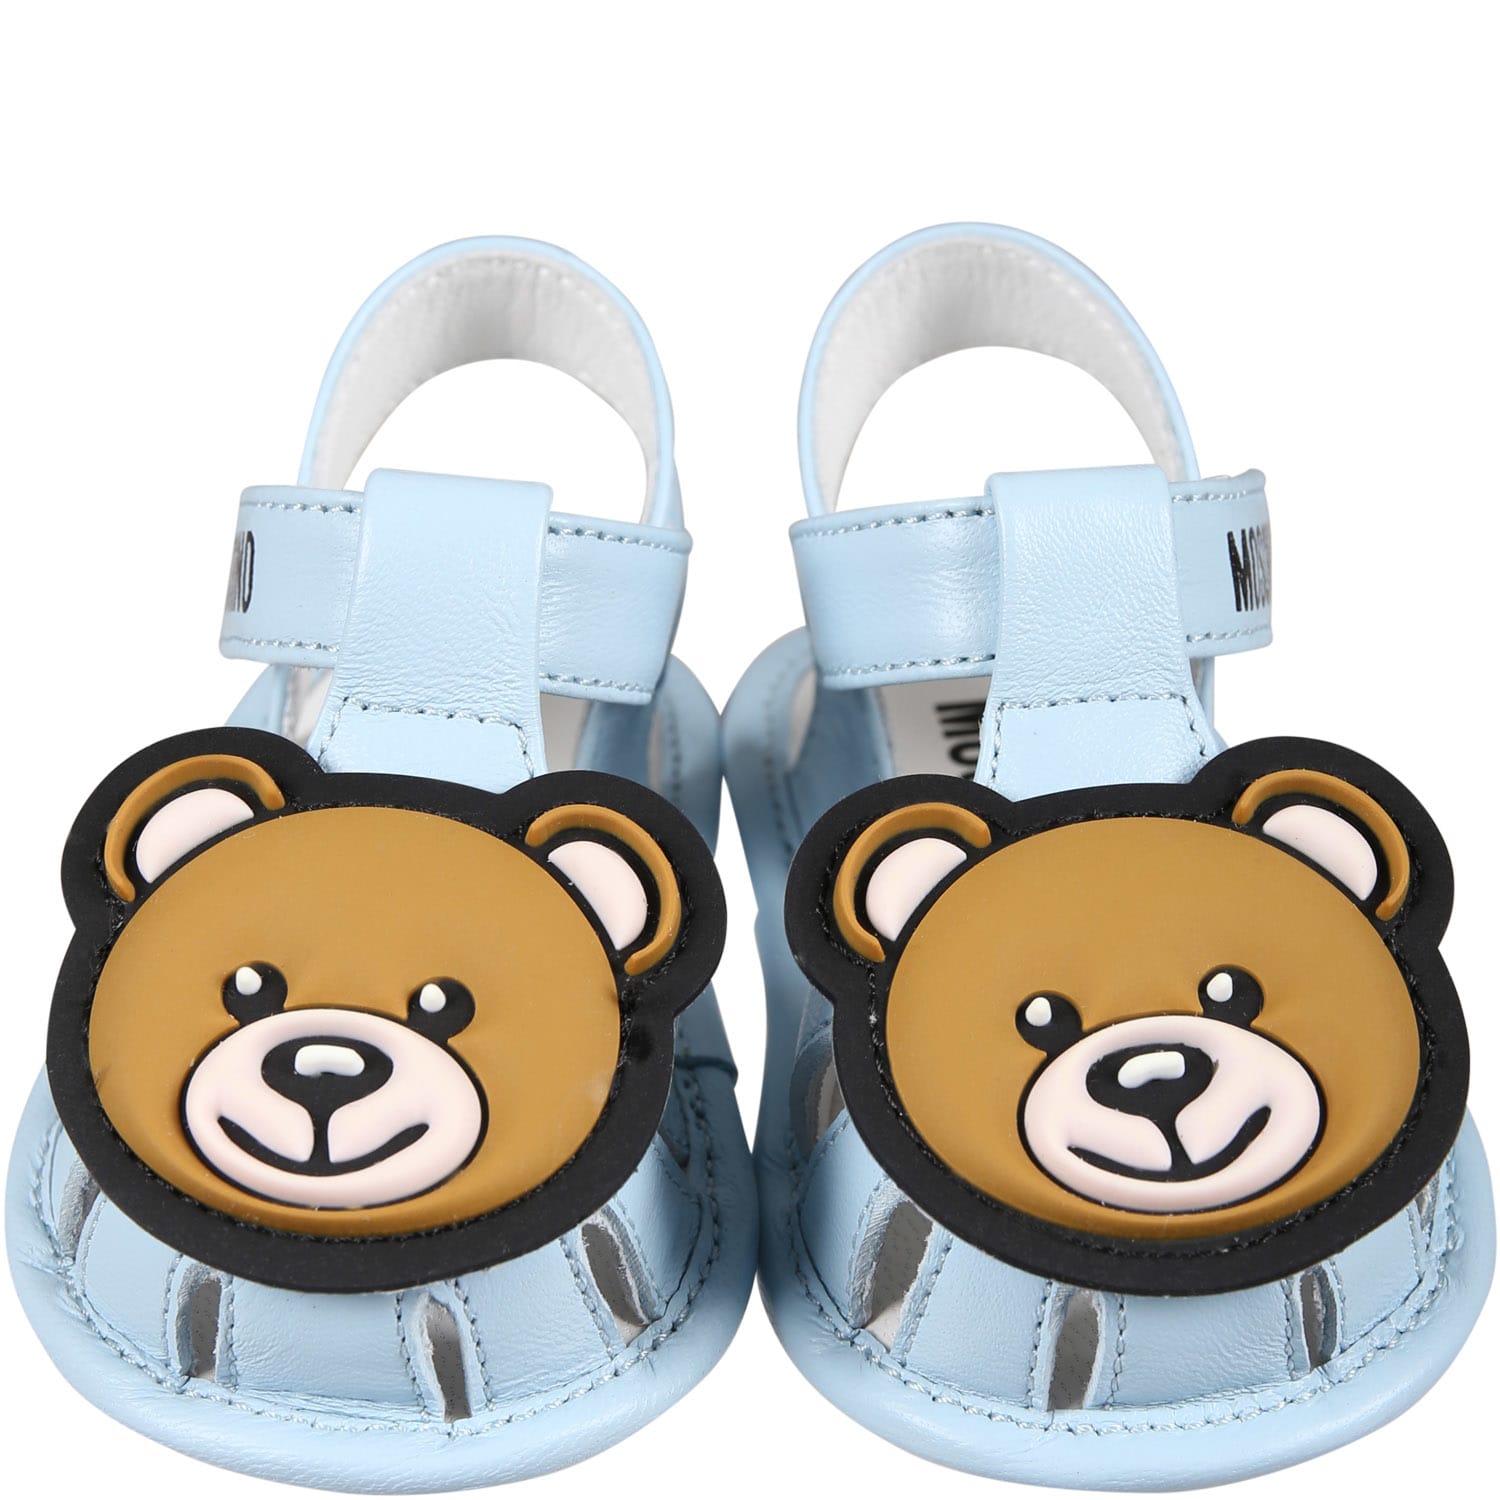 Shop Moschino Light Blue Sandals For Baby Boy With Teddy Bear